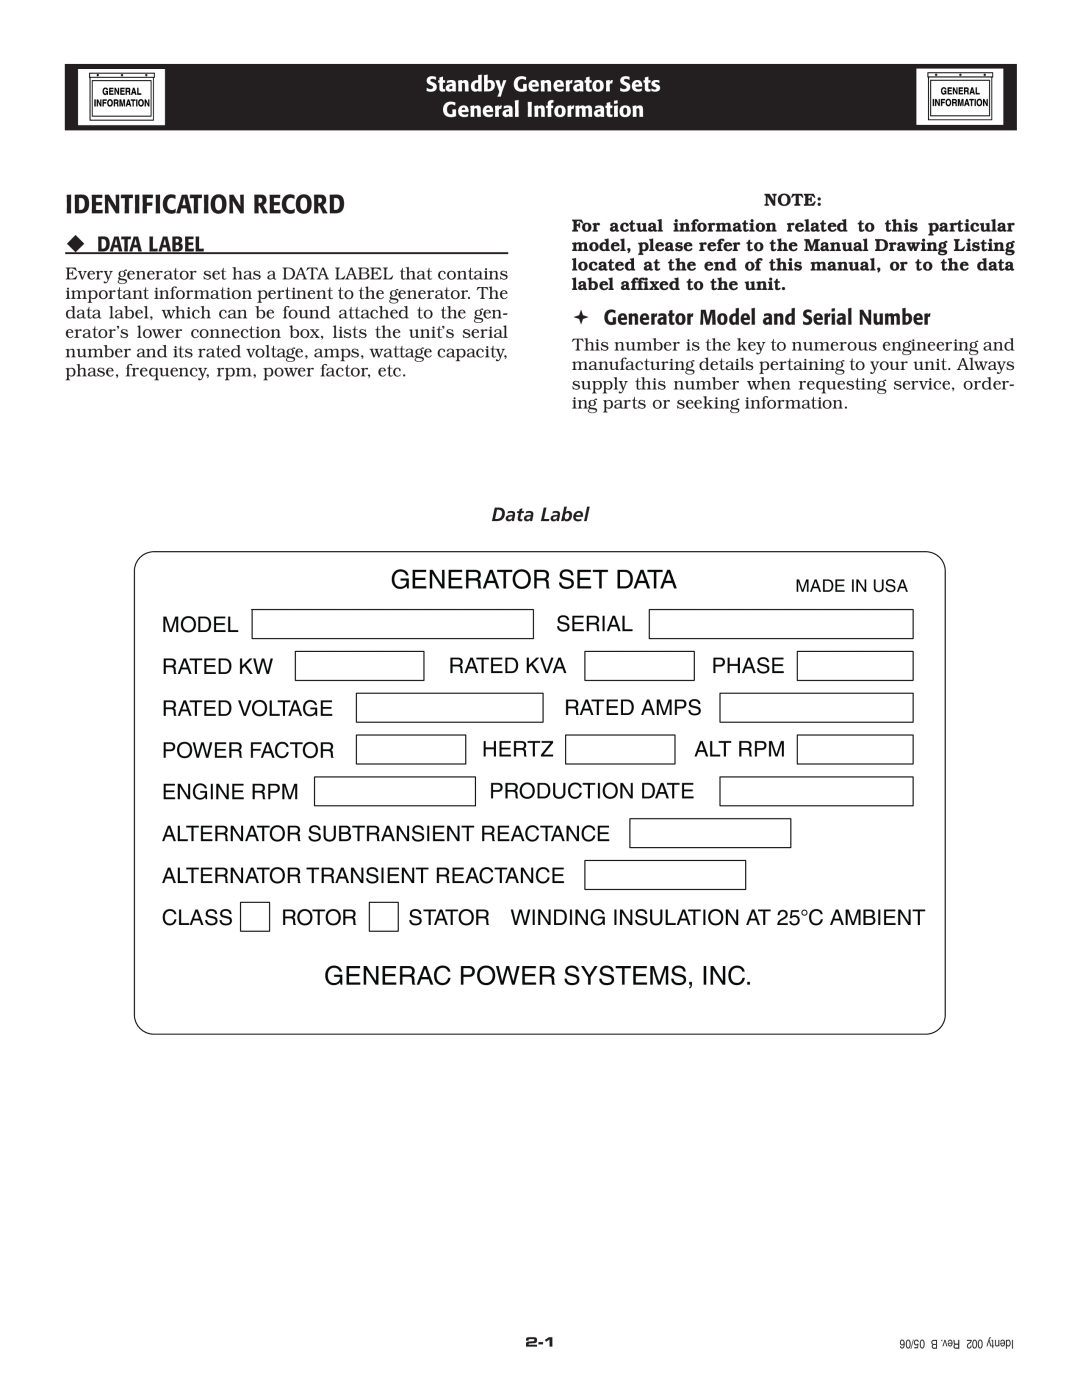 Generac Power Systems 005324-1, 005325-1 Identification Record, Standby Generator Sets General Information, ‹Data Label 